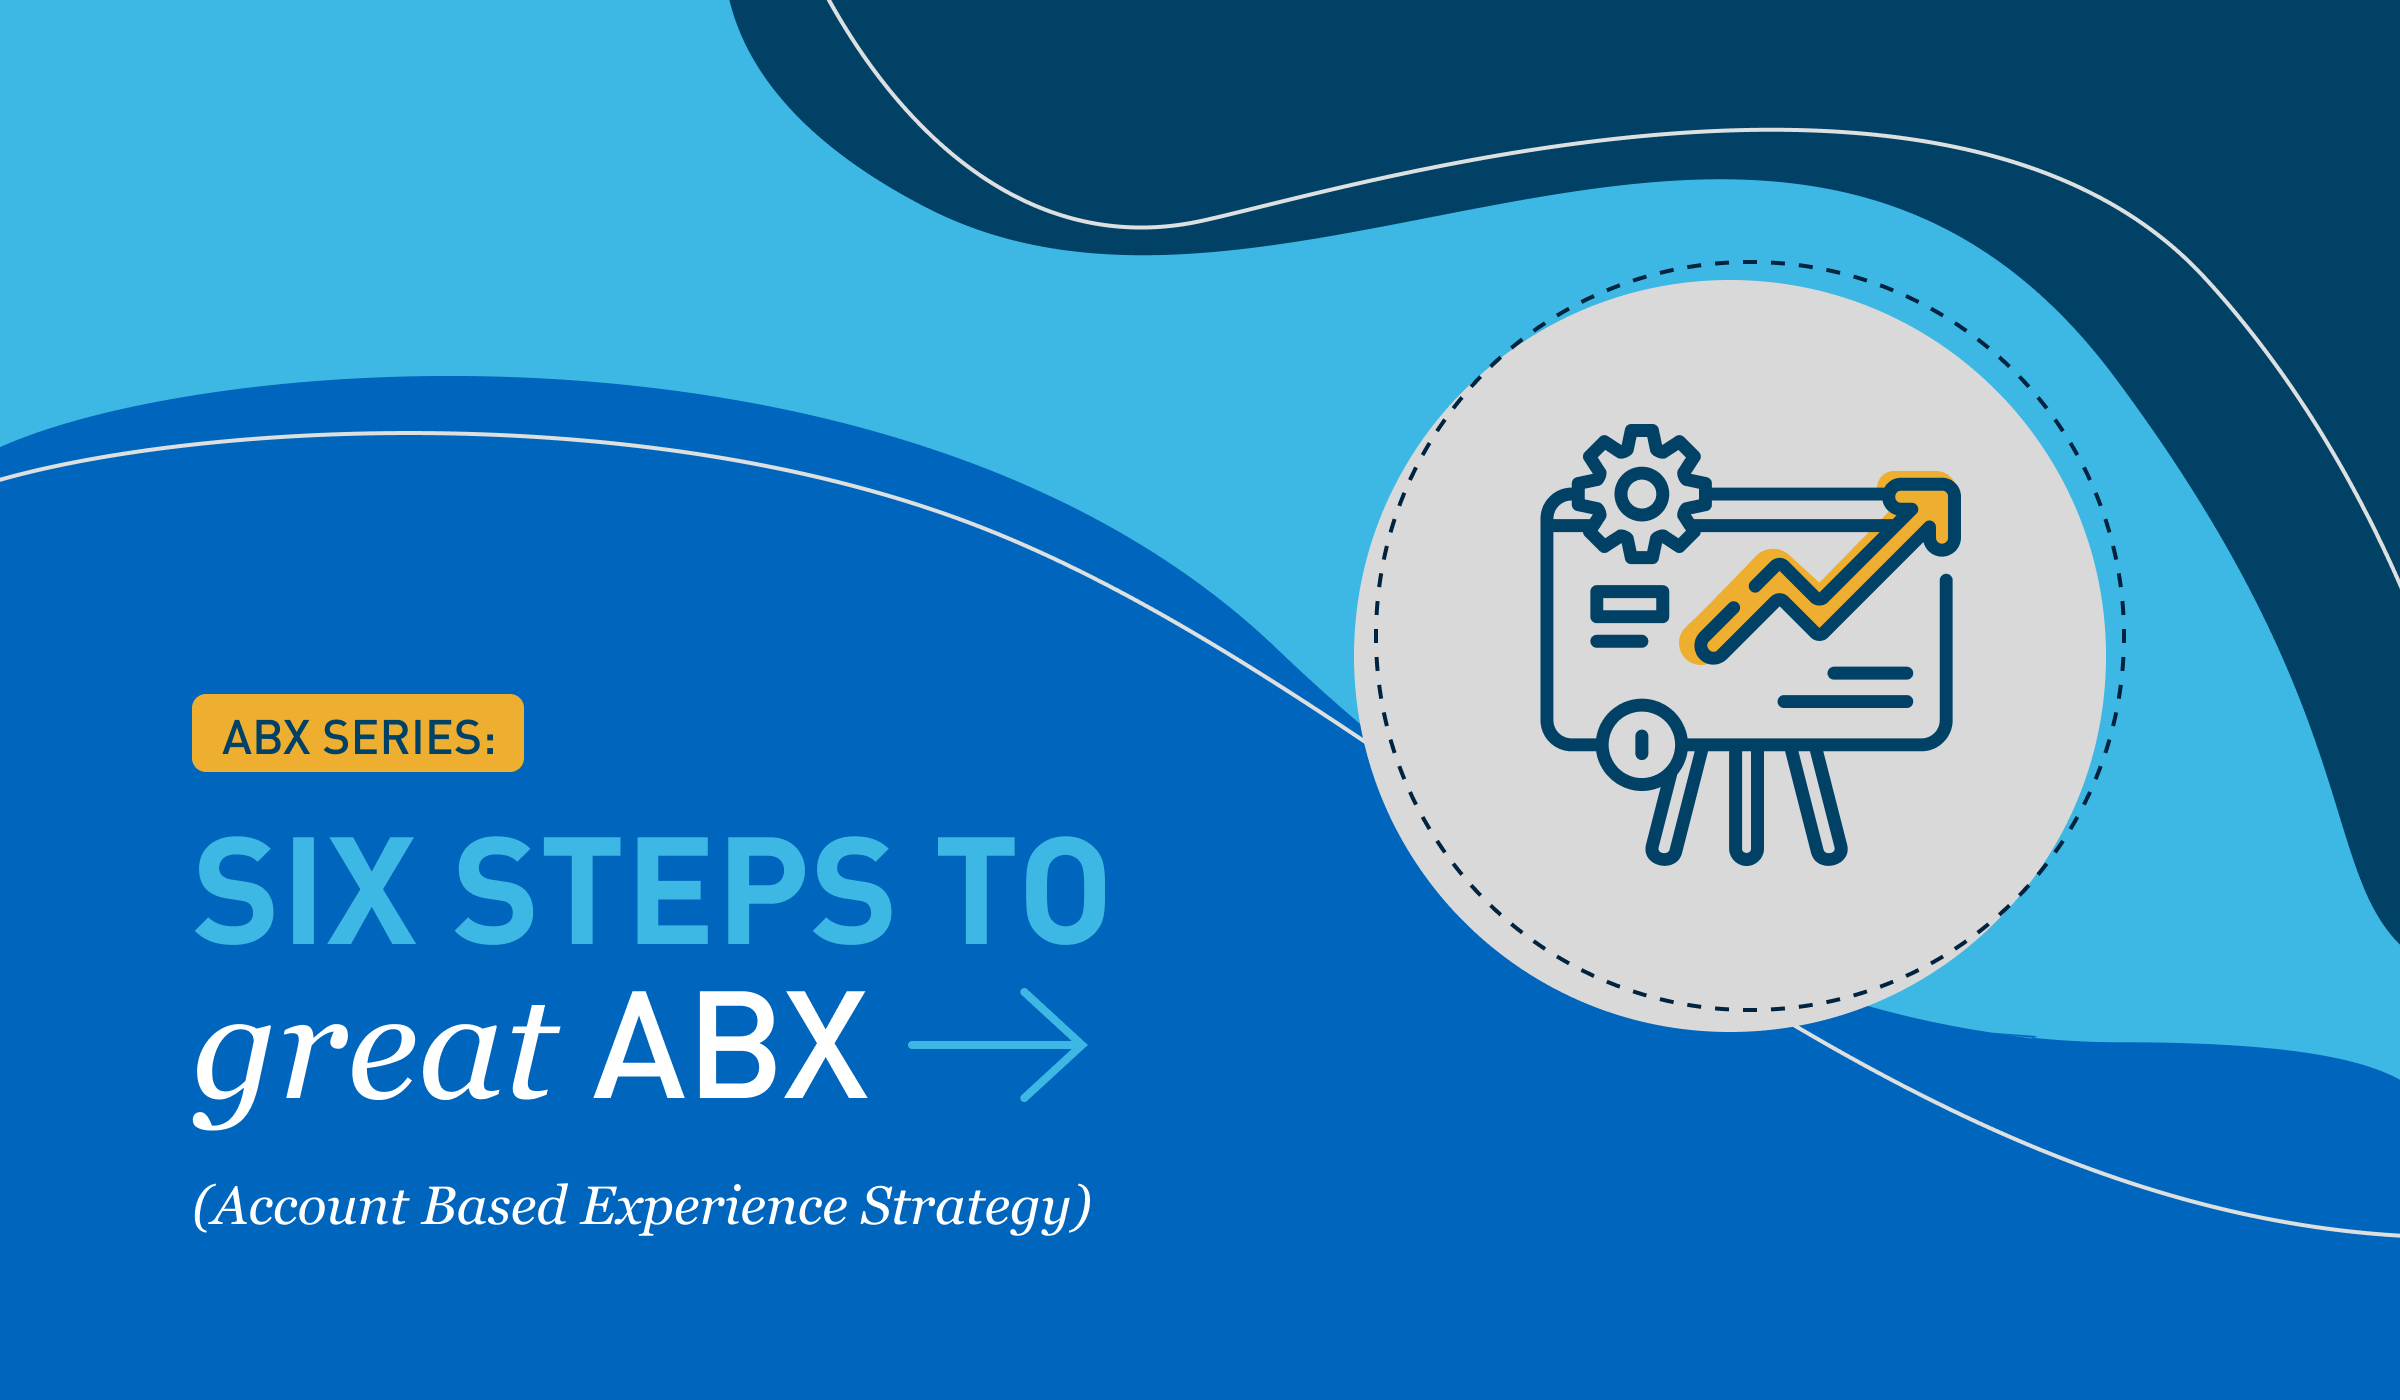 2954: ABX Series - 6 six steps to great ABX